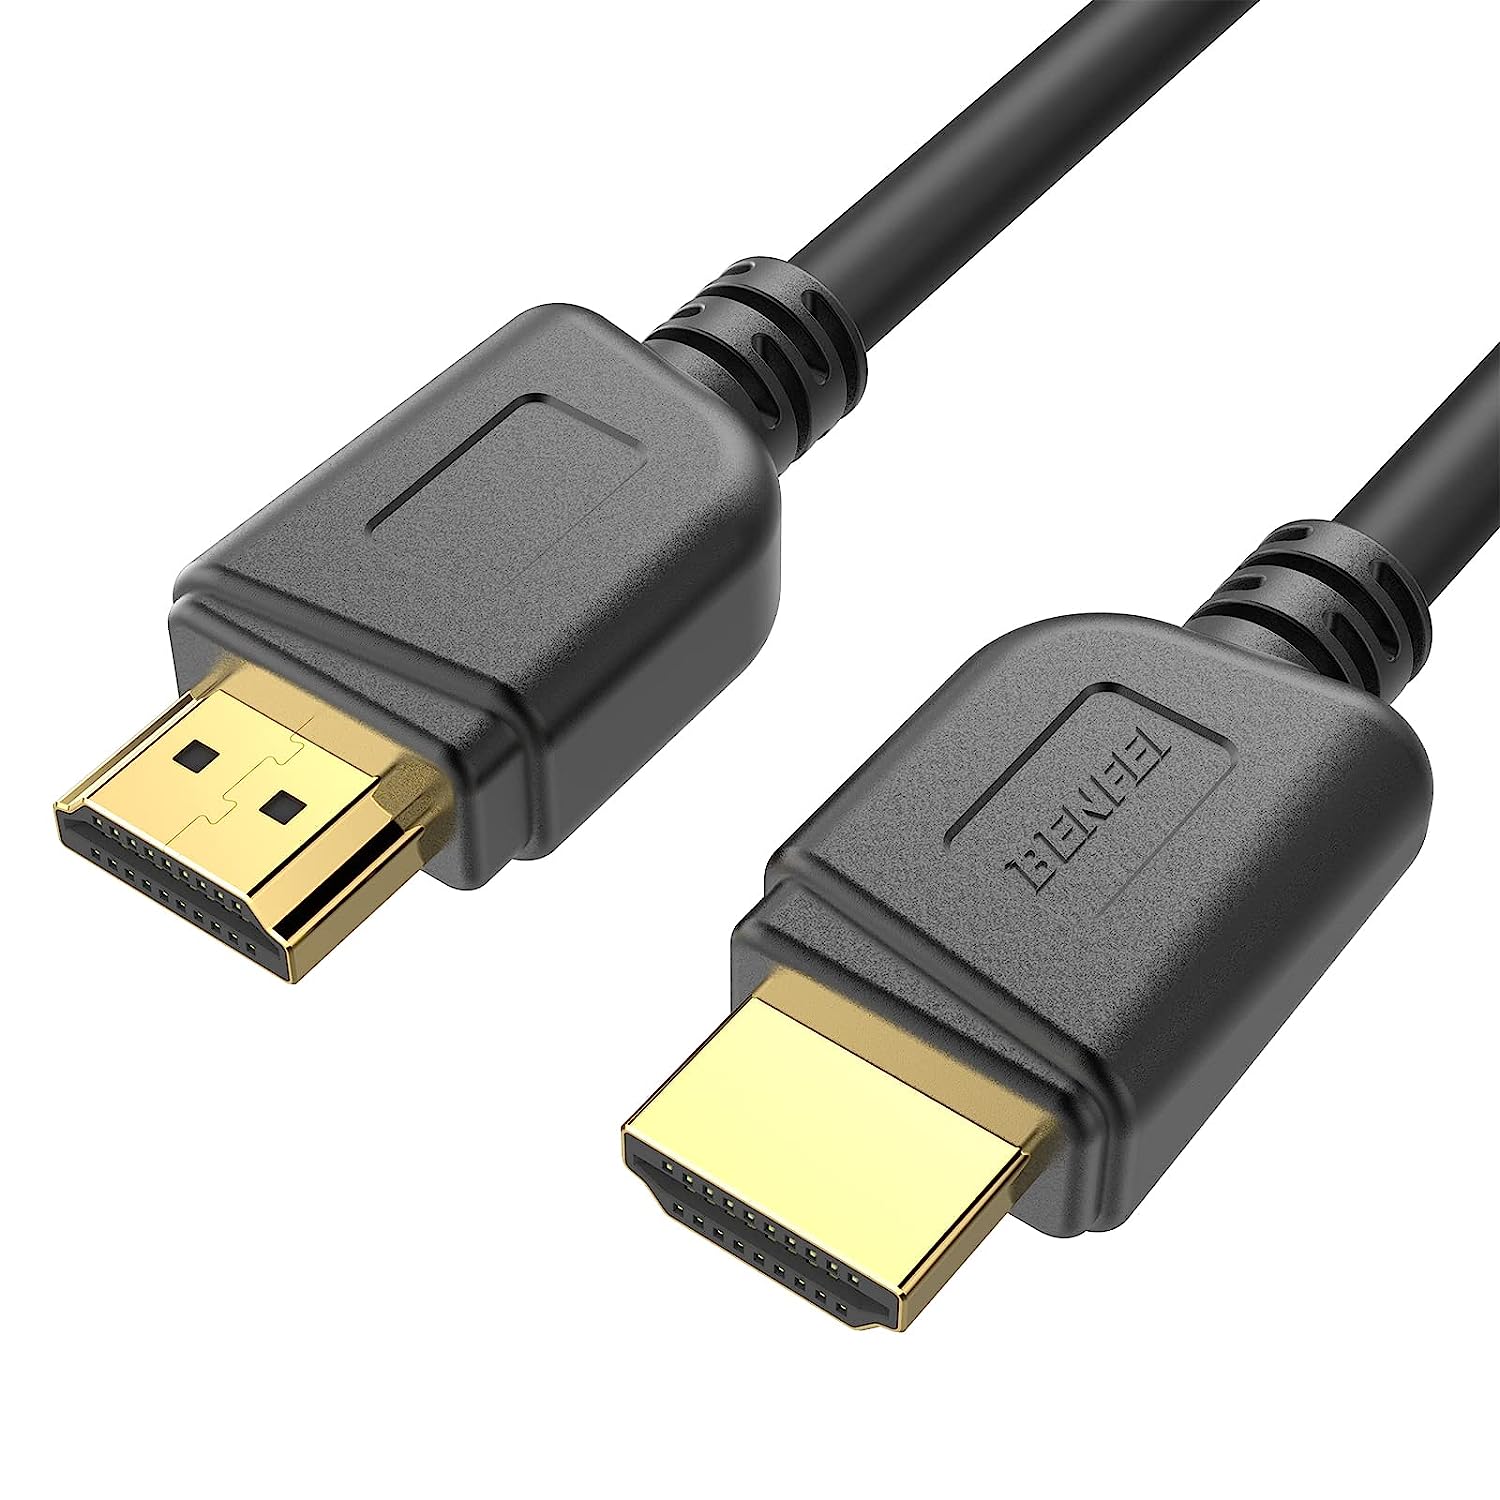 BENFEI HDMI to HDMI Cable, 4K@60Hz High Speed 6ft HDMI [...]